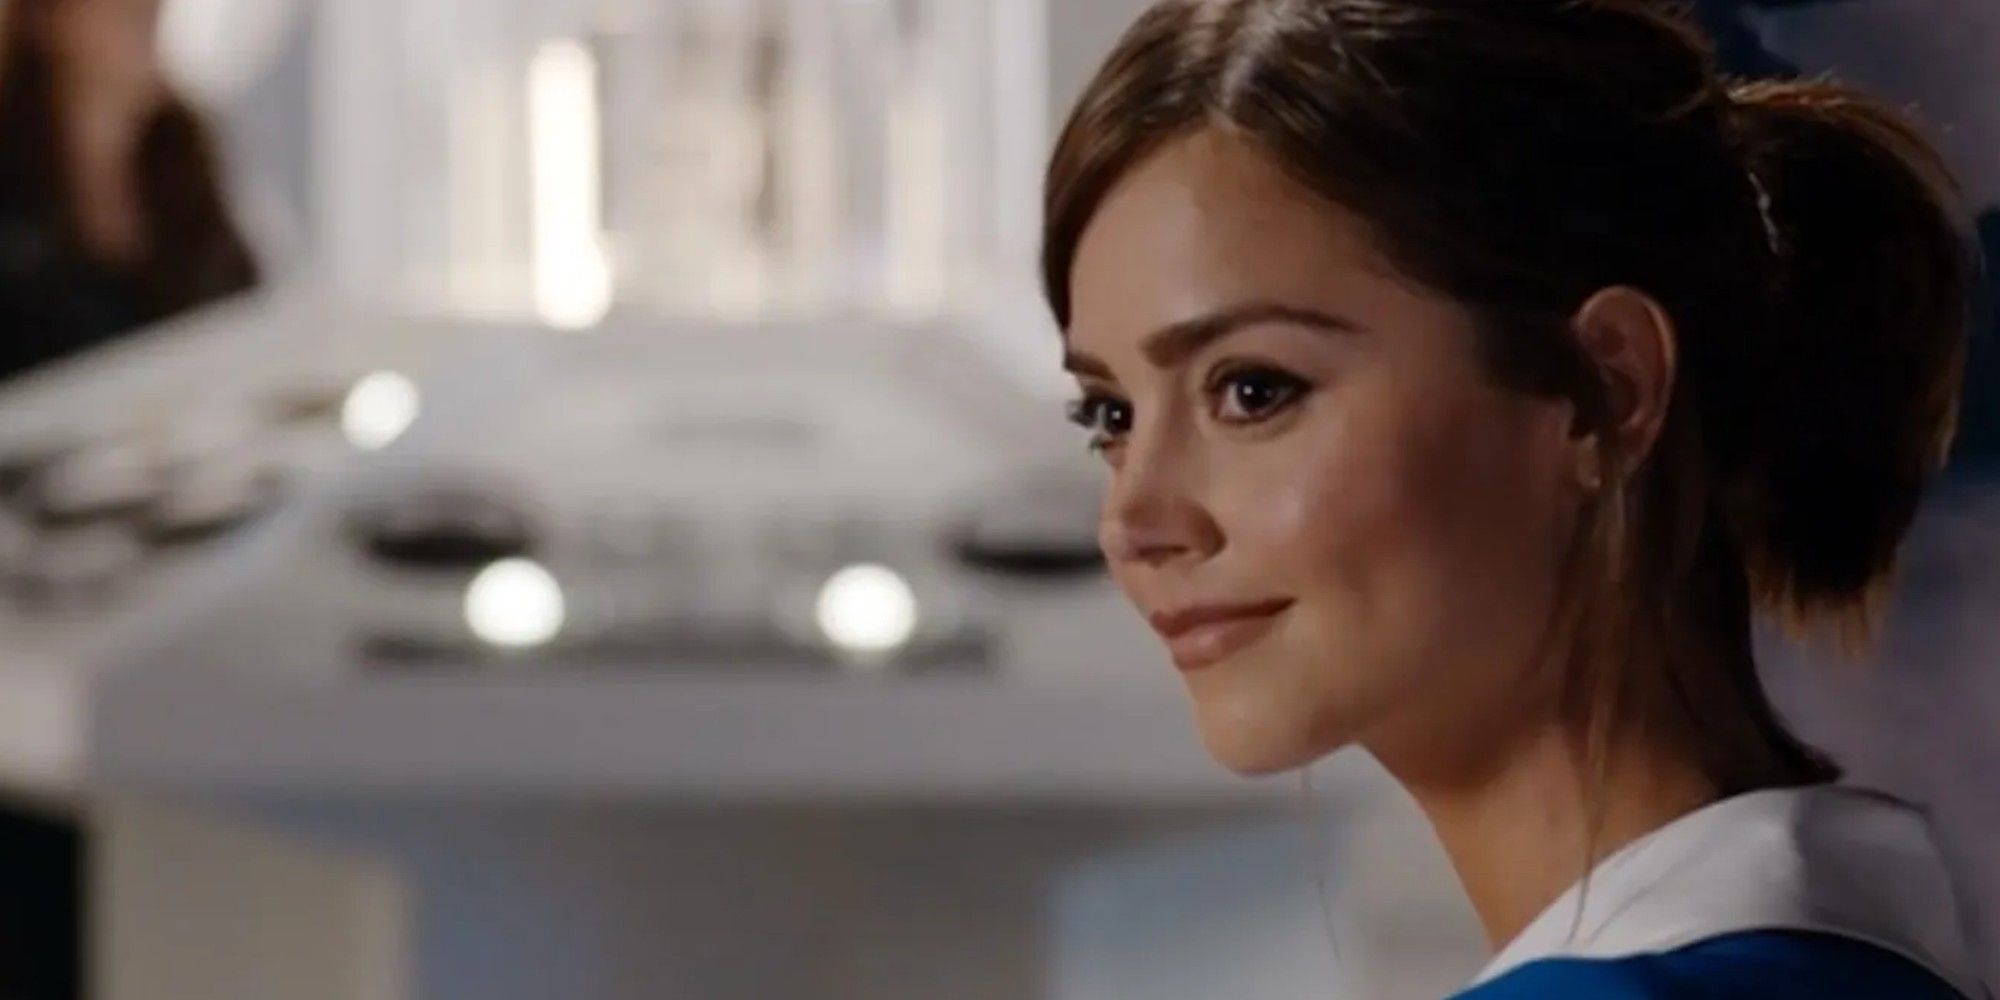 Doctor Who HellBent Jenna Coleman as Clara Oswald in the Diner TARDIS